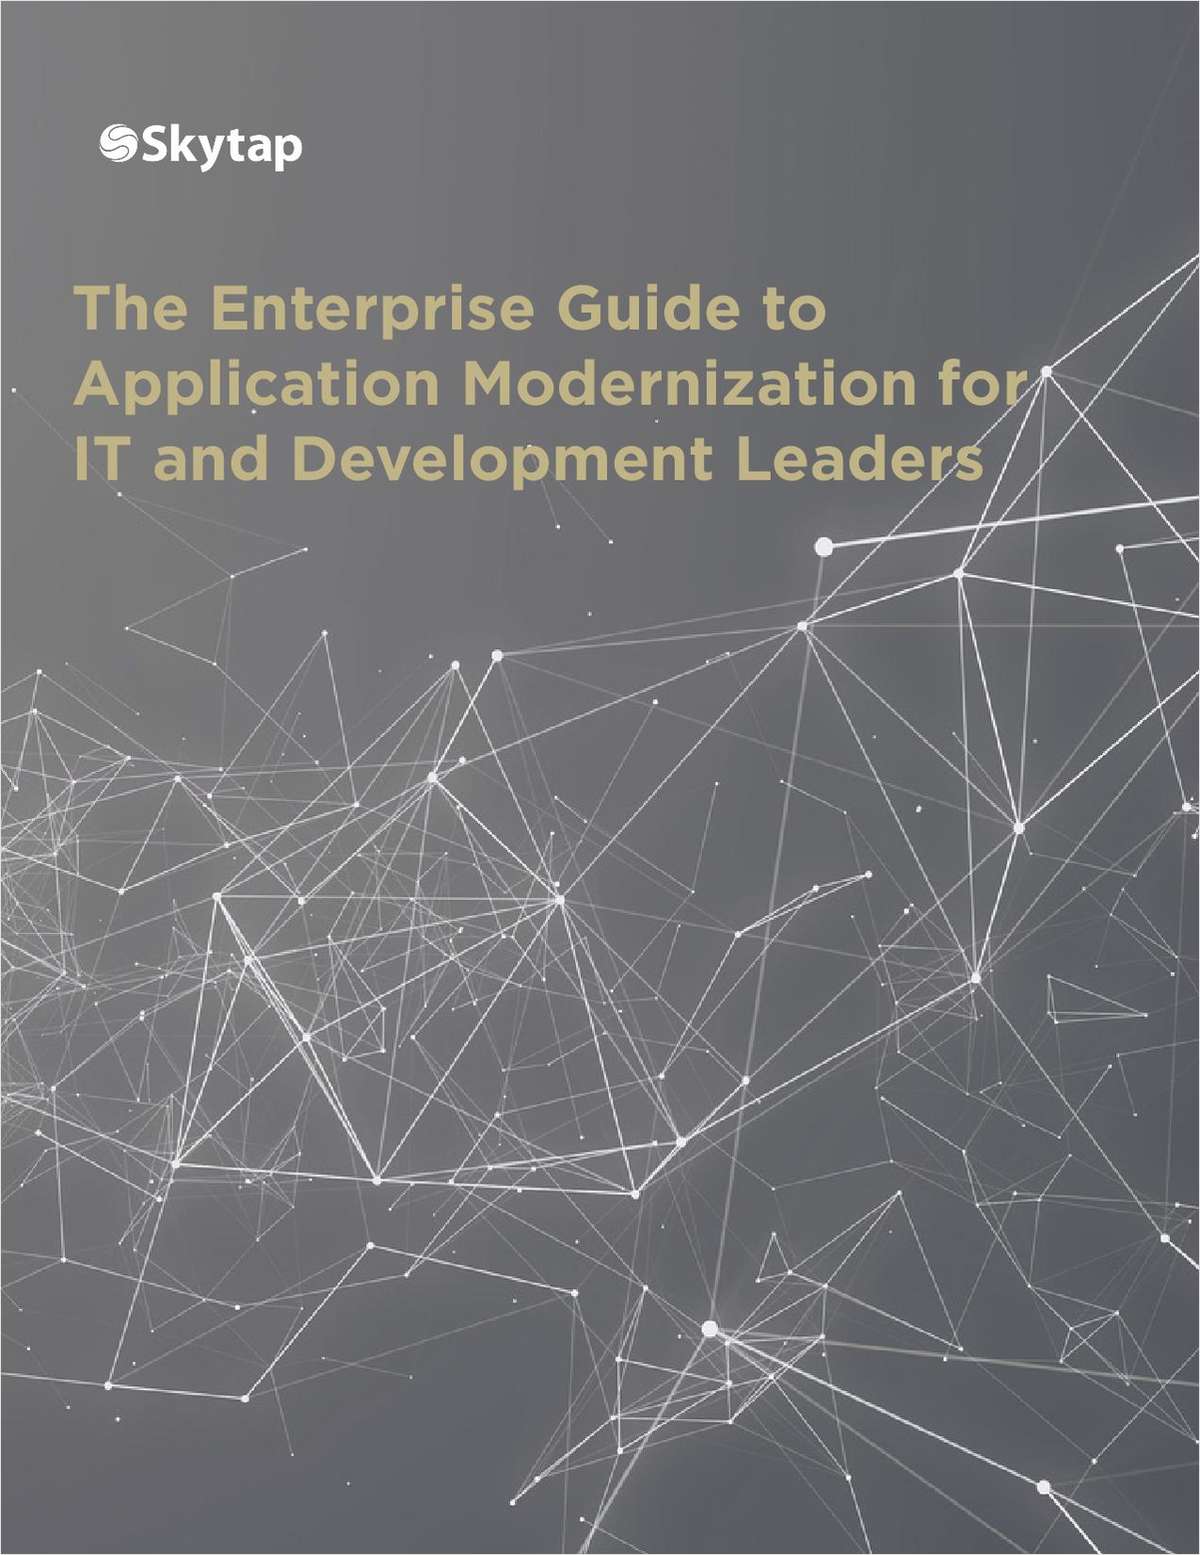 The Enterprise Guide to Application Modernization for IT and Development Leaders